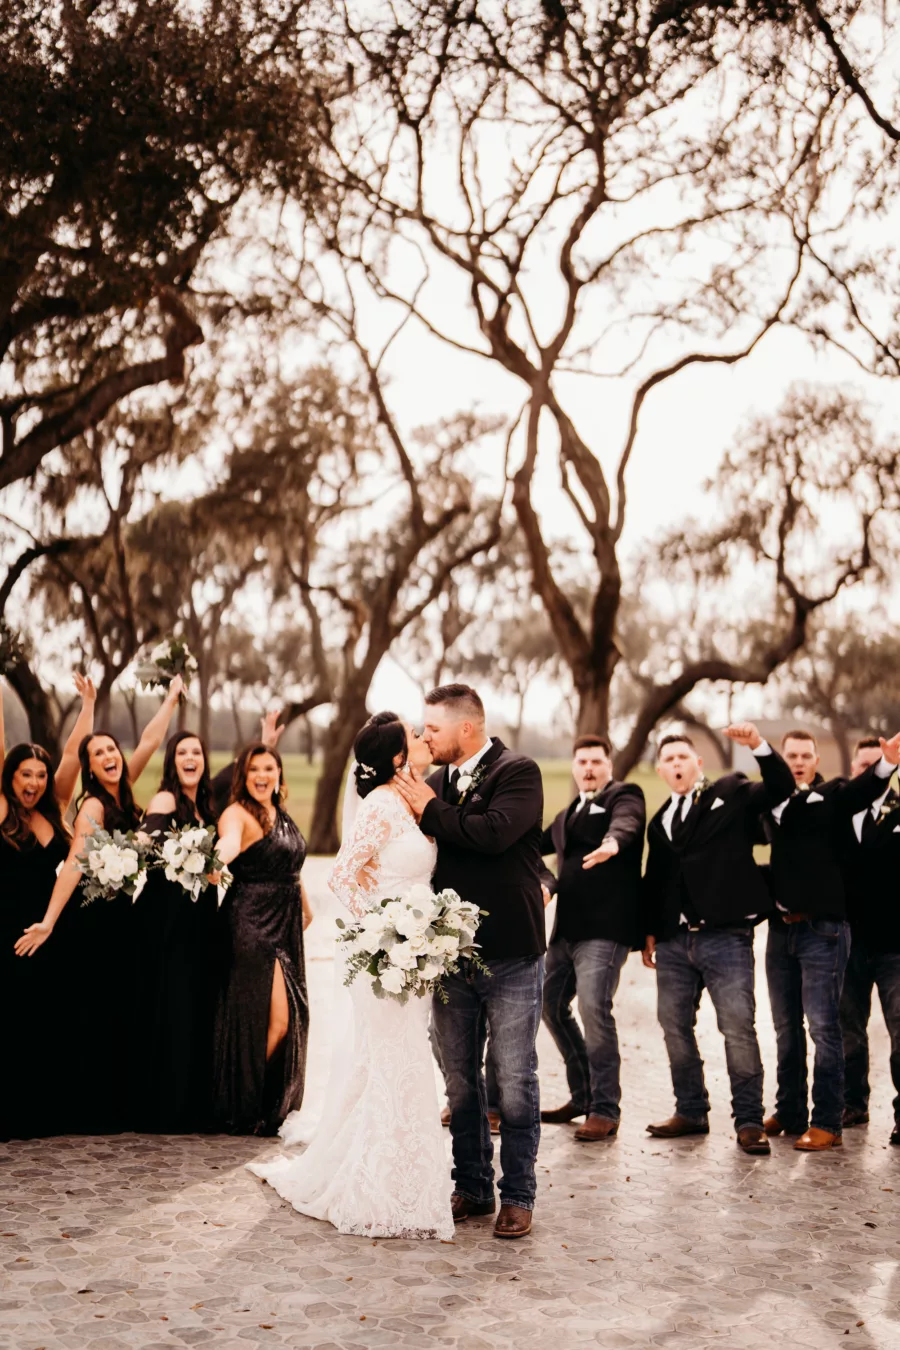 Southern Groomsmen Wedding Attire Inspiration | Black Jackets, Jeans, and Cowboy Boots | Mismatched Bridesmaid Dress Ideas | Tampa Bay Event Venue Simpson Lakes